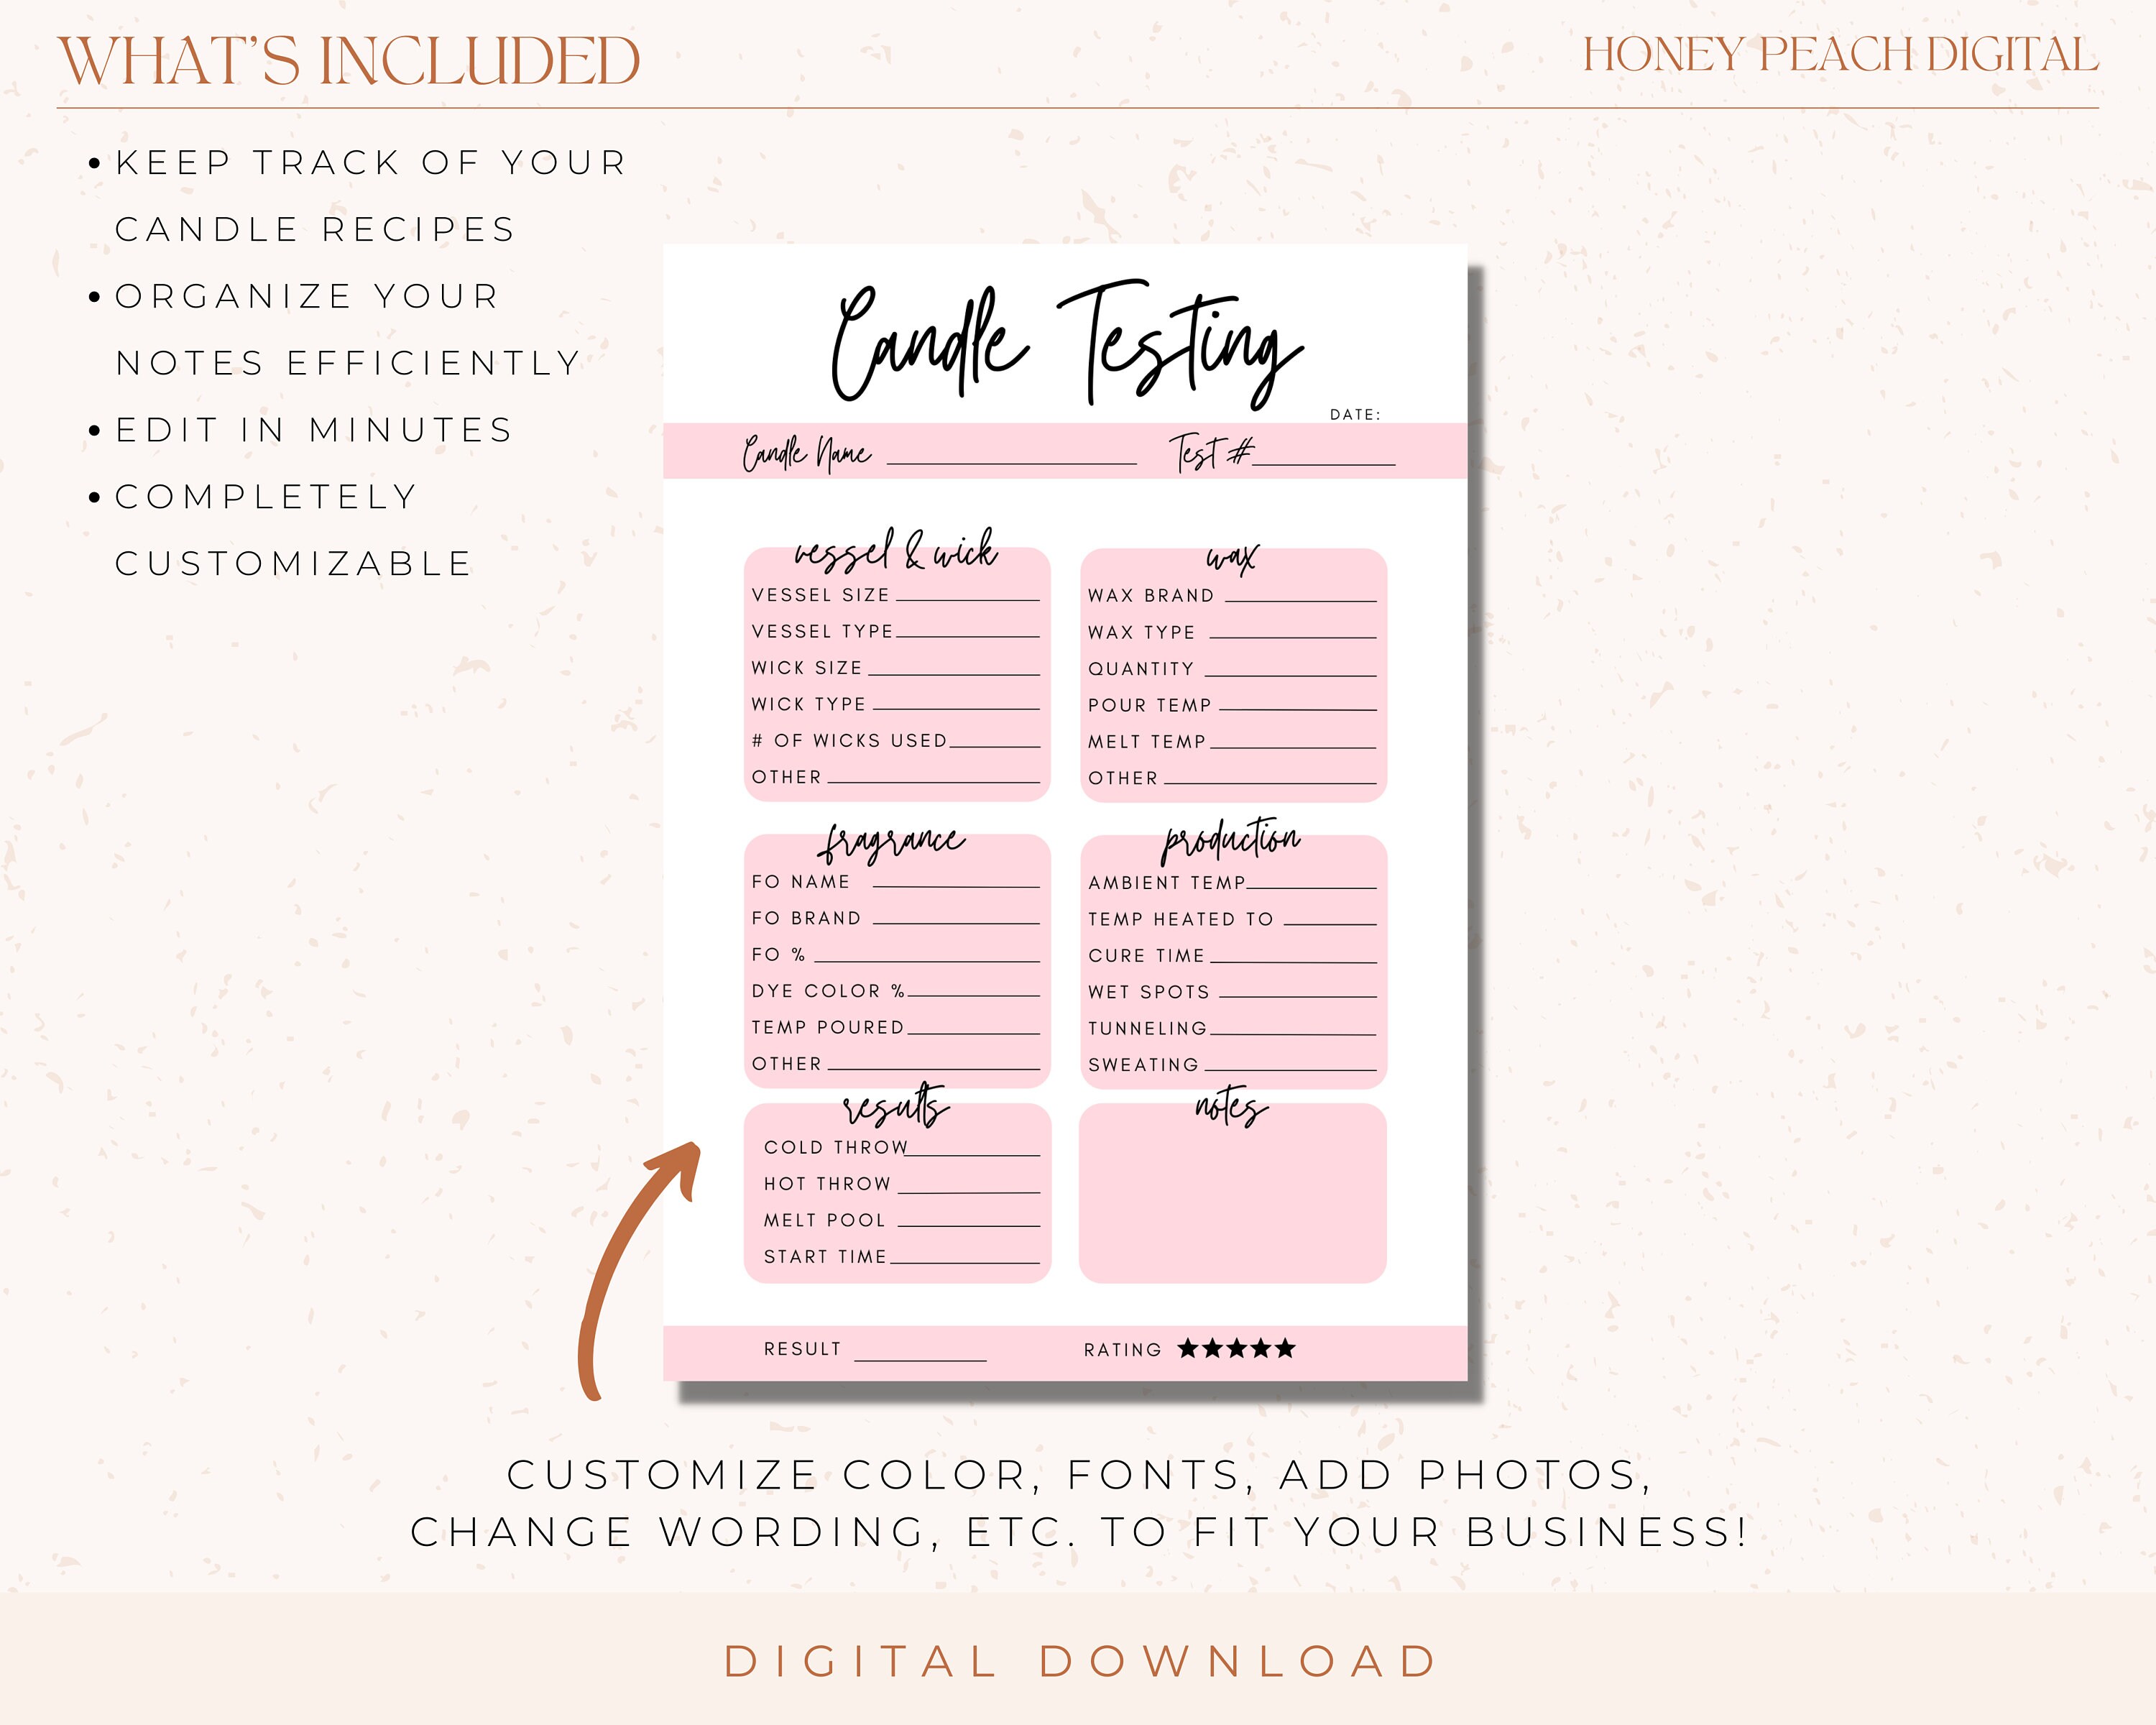 Editable Candle Making and Testing Label Template – 413 Studio